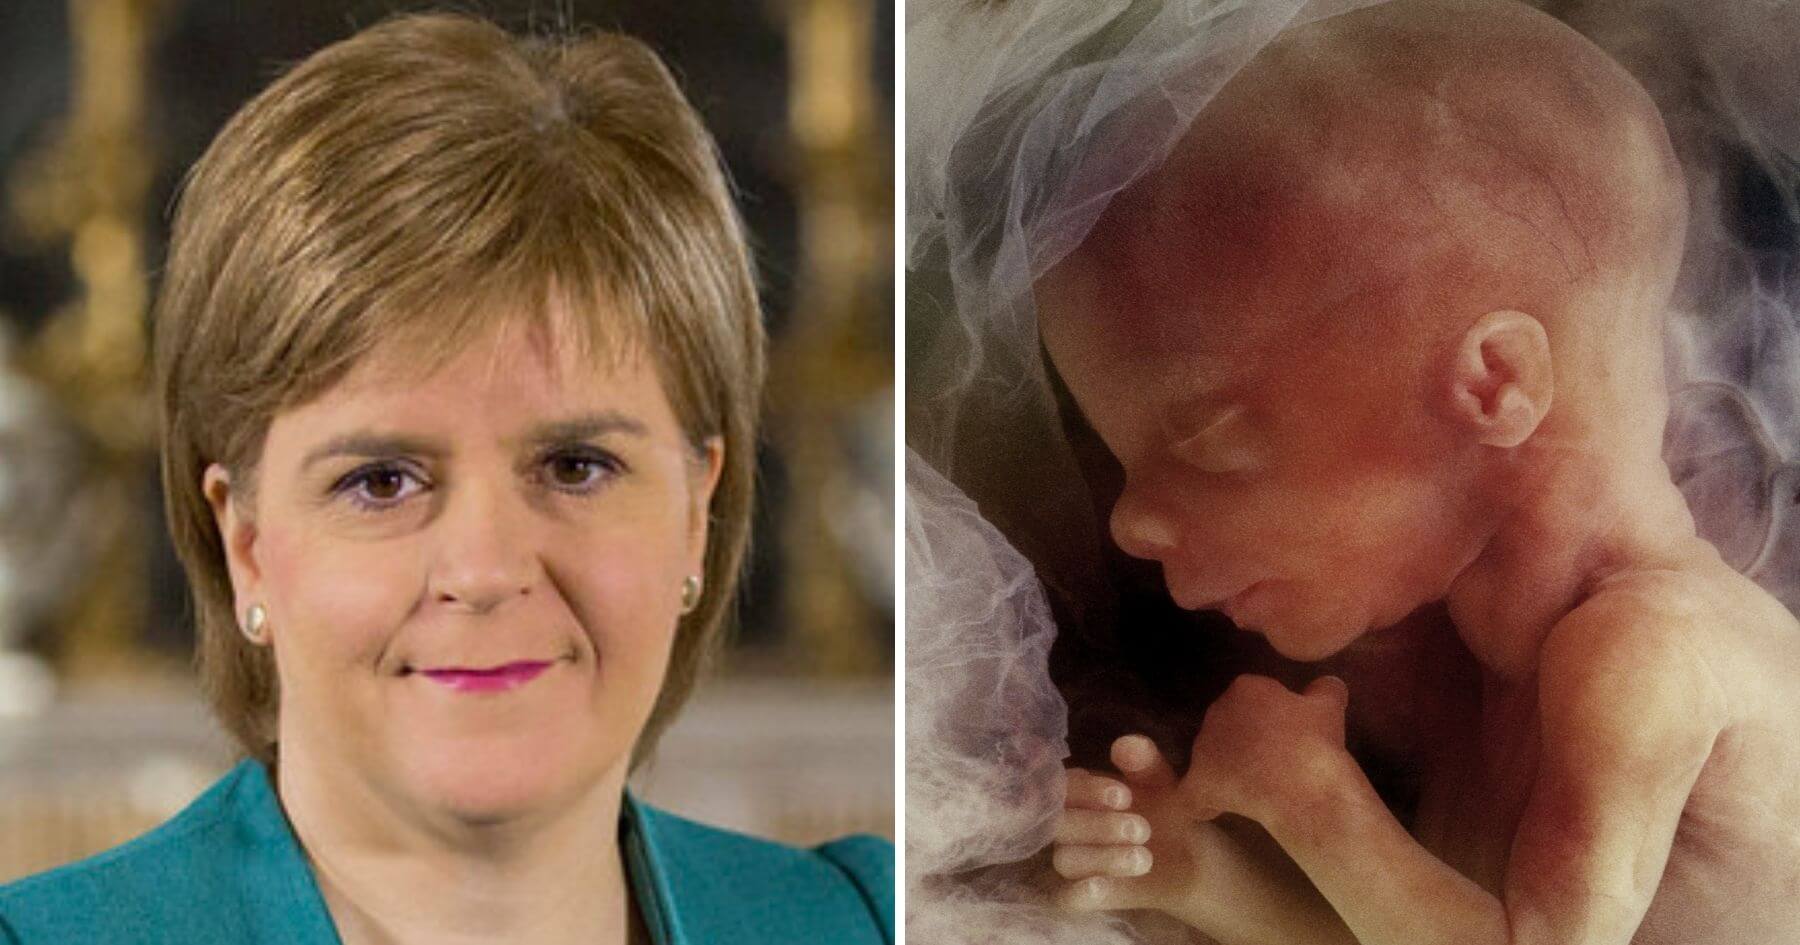 scottish govt proposes increasing no of late term abortion clinics